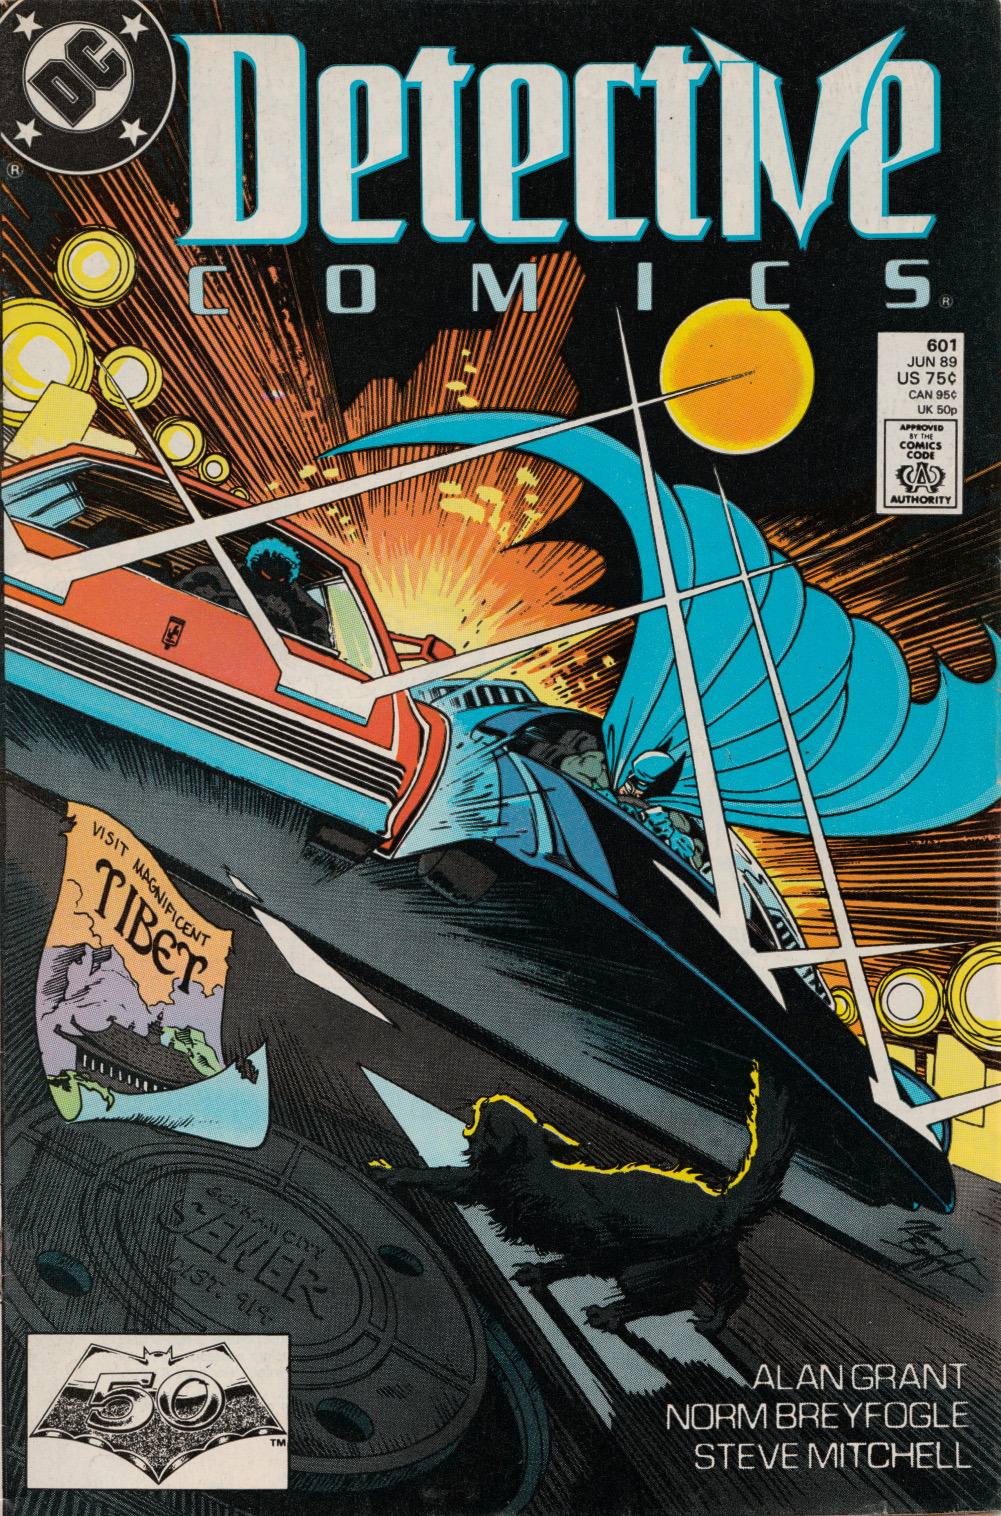 Detective Comics No. 601 (DC Comics, 1989). Cover art by Norm Breyfogle. From a charity